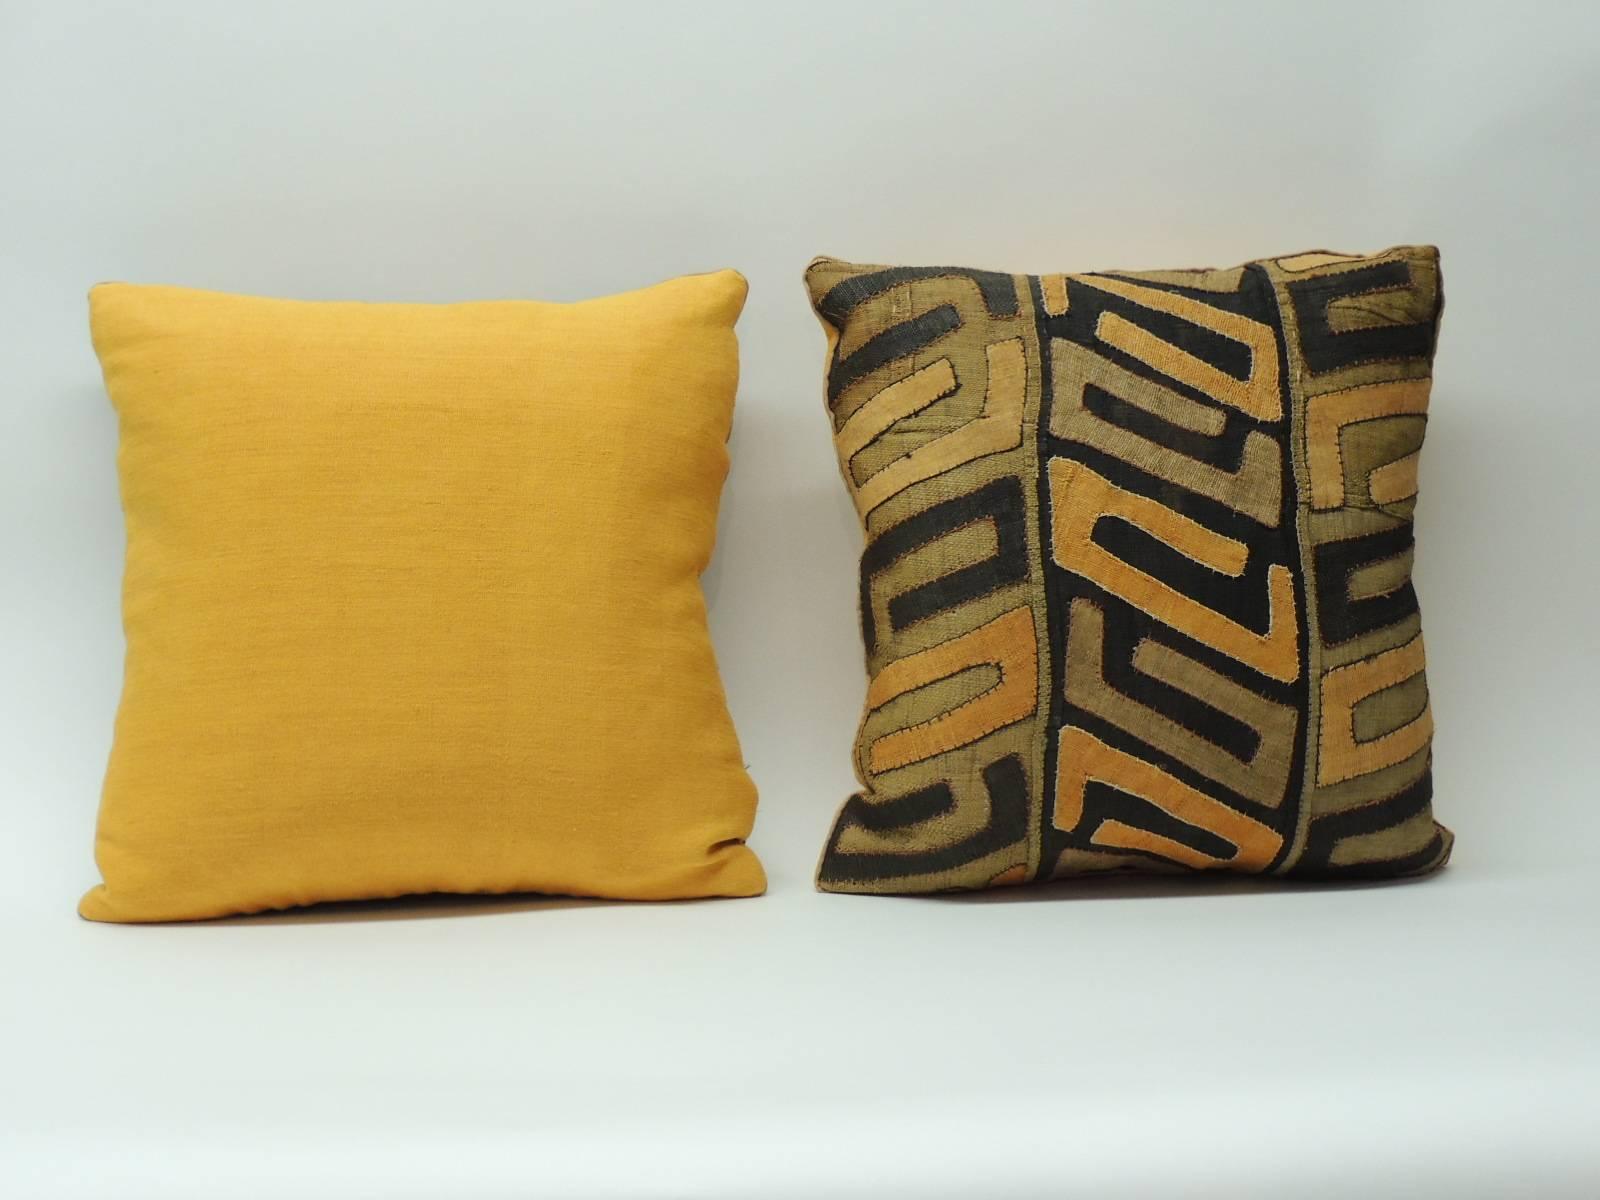 Pair of 19th century African Kuba pillows.  Tribal design orange and black appliqué on raffia decorative pillows. Textured orange backings with a small cotton trim all around.  Hand-crafted and designed in the USA.  Custom made pillow insert. 